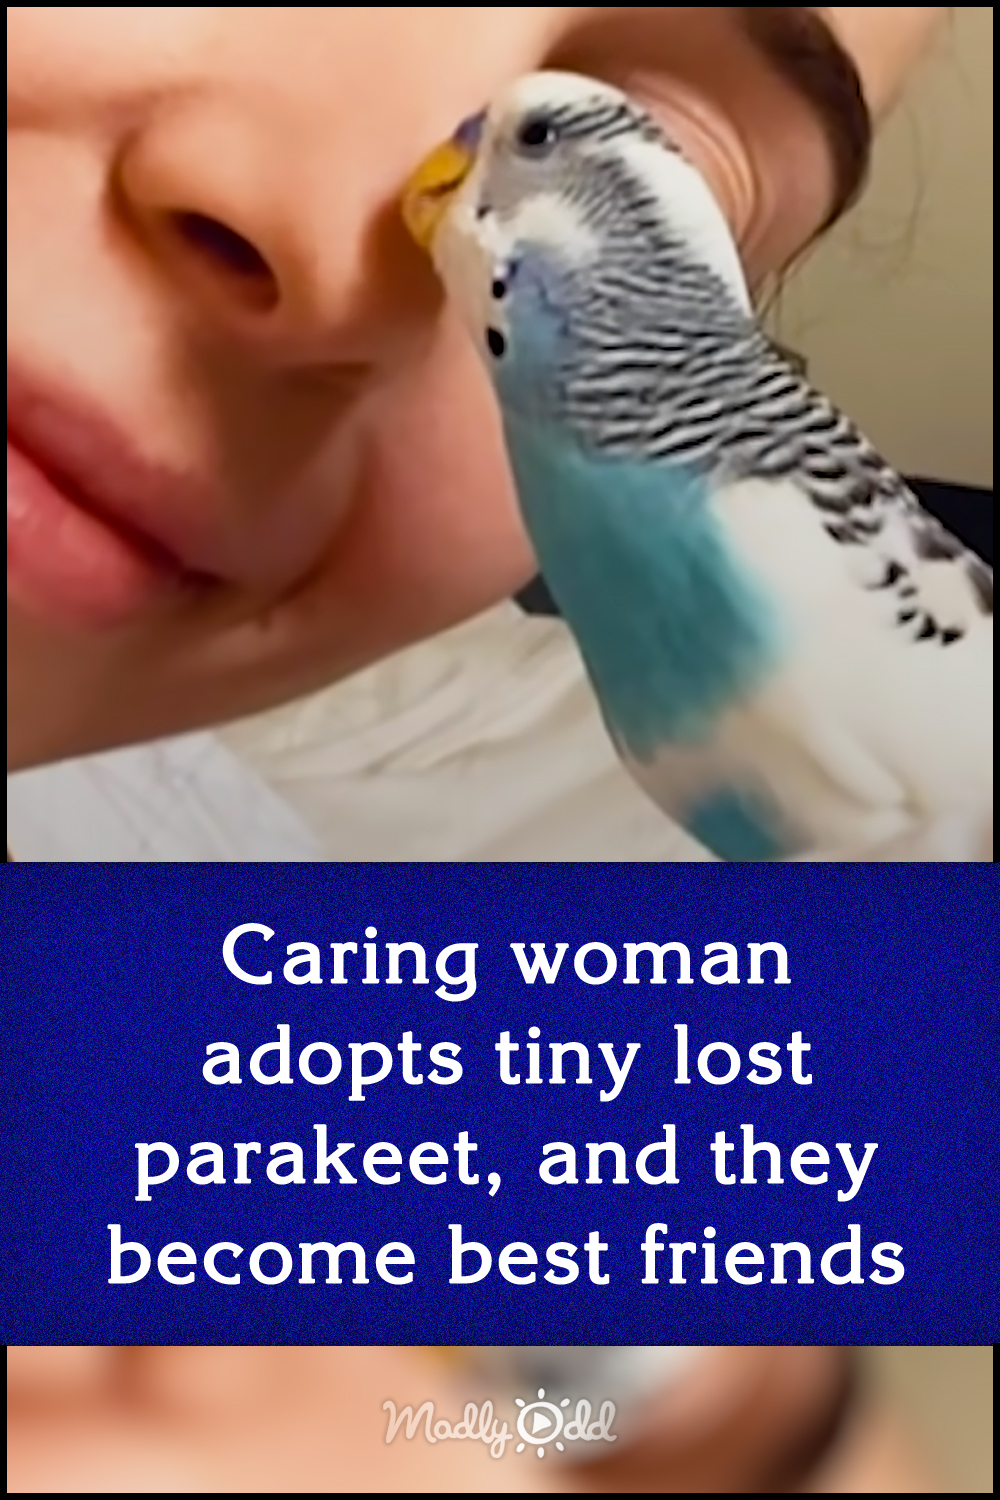 Caring woman adopts tiny lost parakeet, and they become best friends